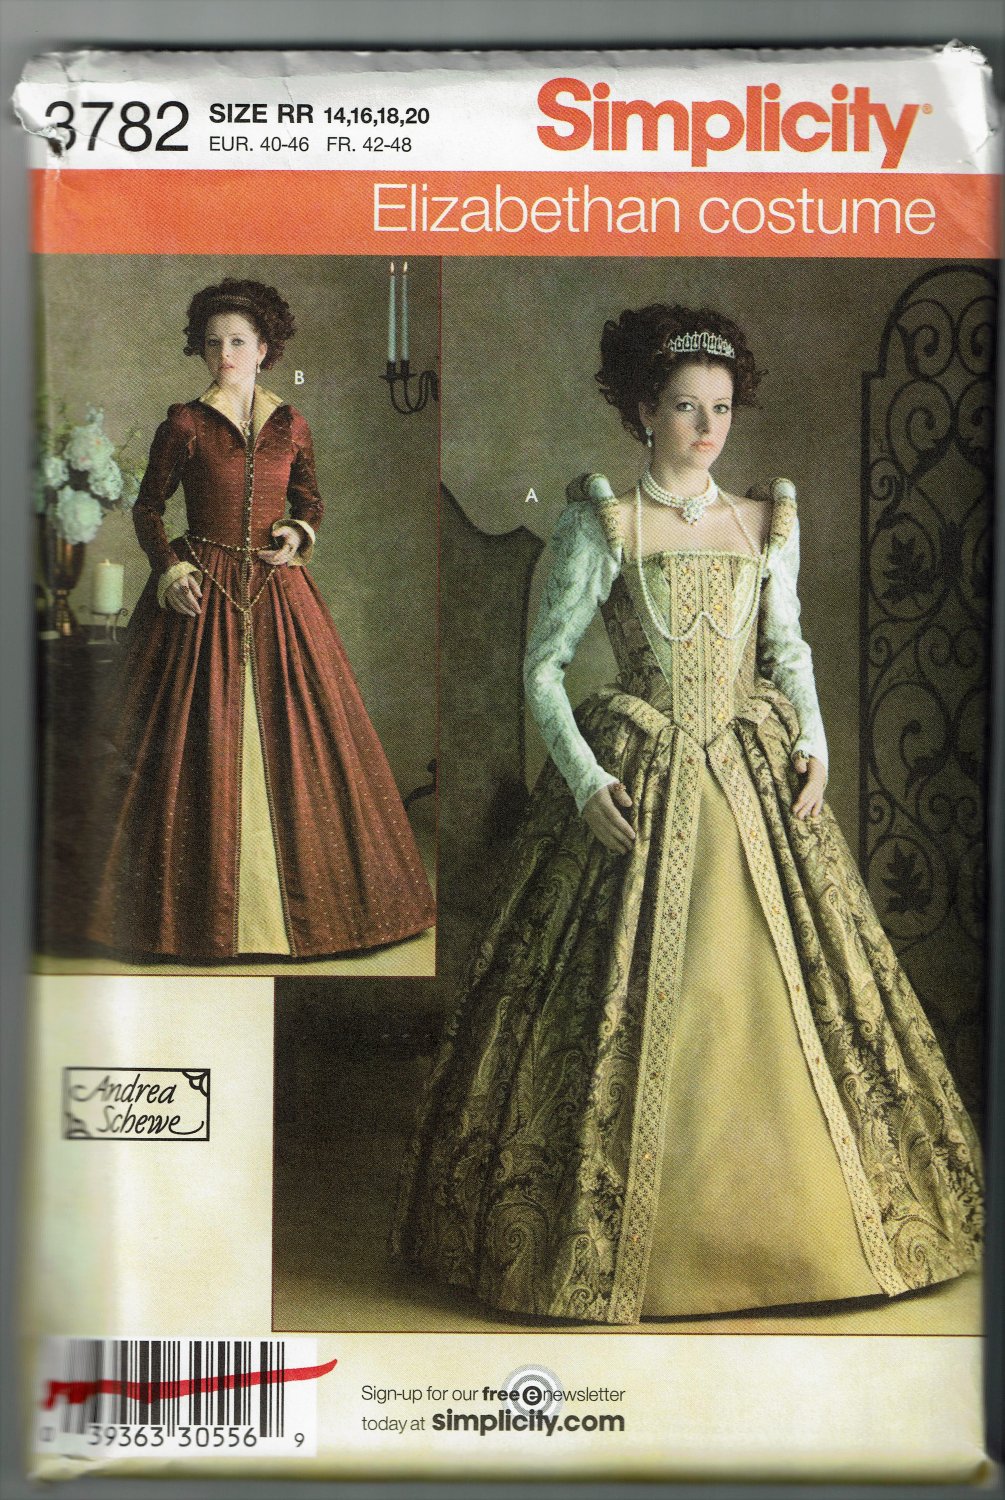 Simplicity 3782 Elizabethan gown costume pattern sizes 14 16 18 20